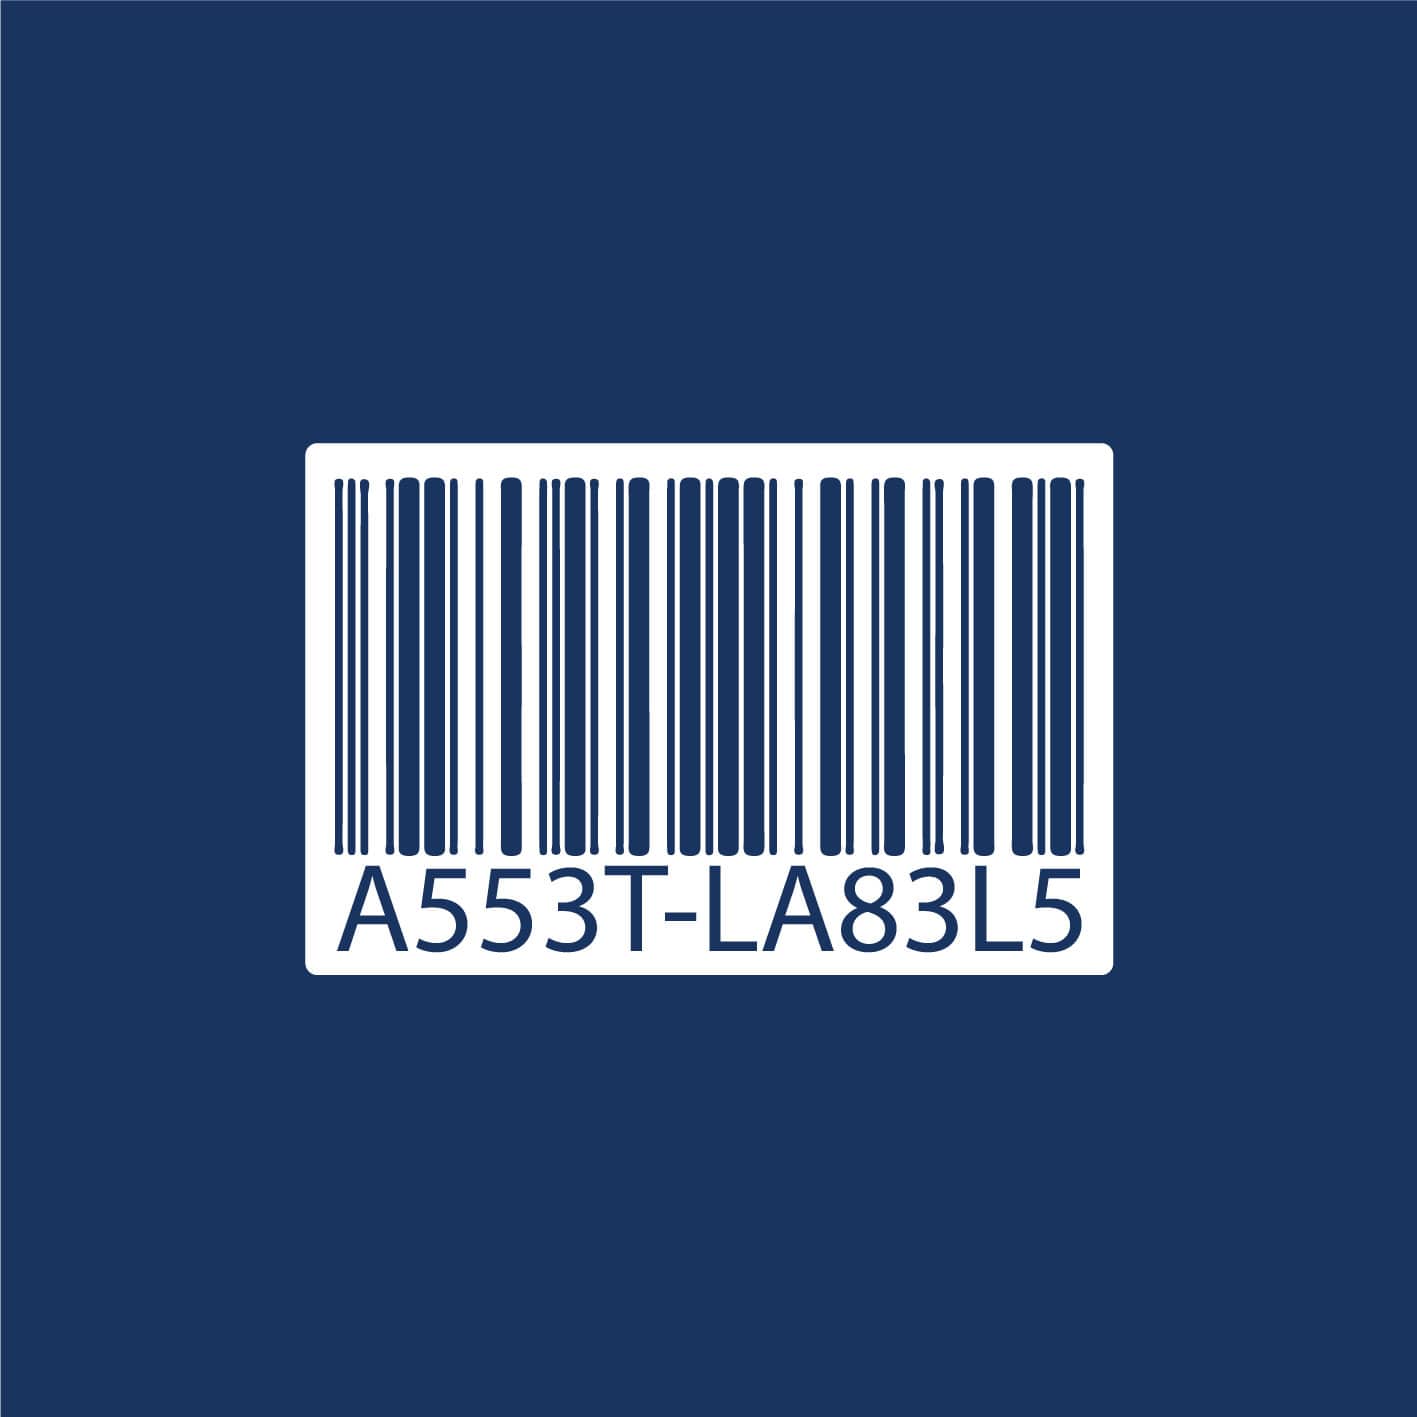 Words asset label on a barcode